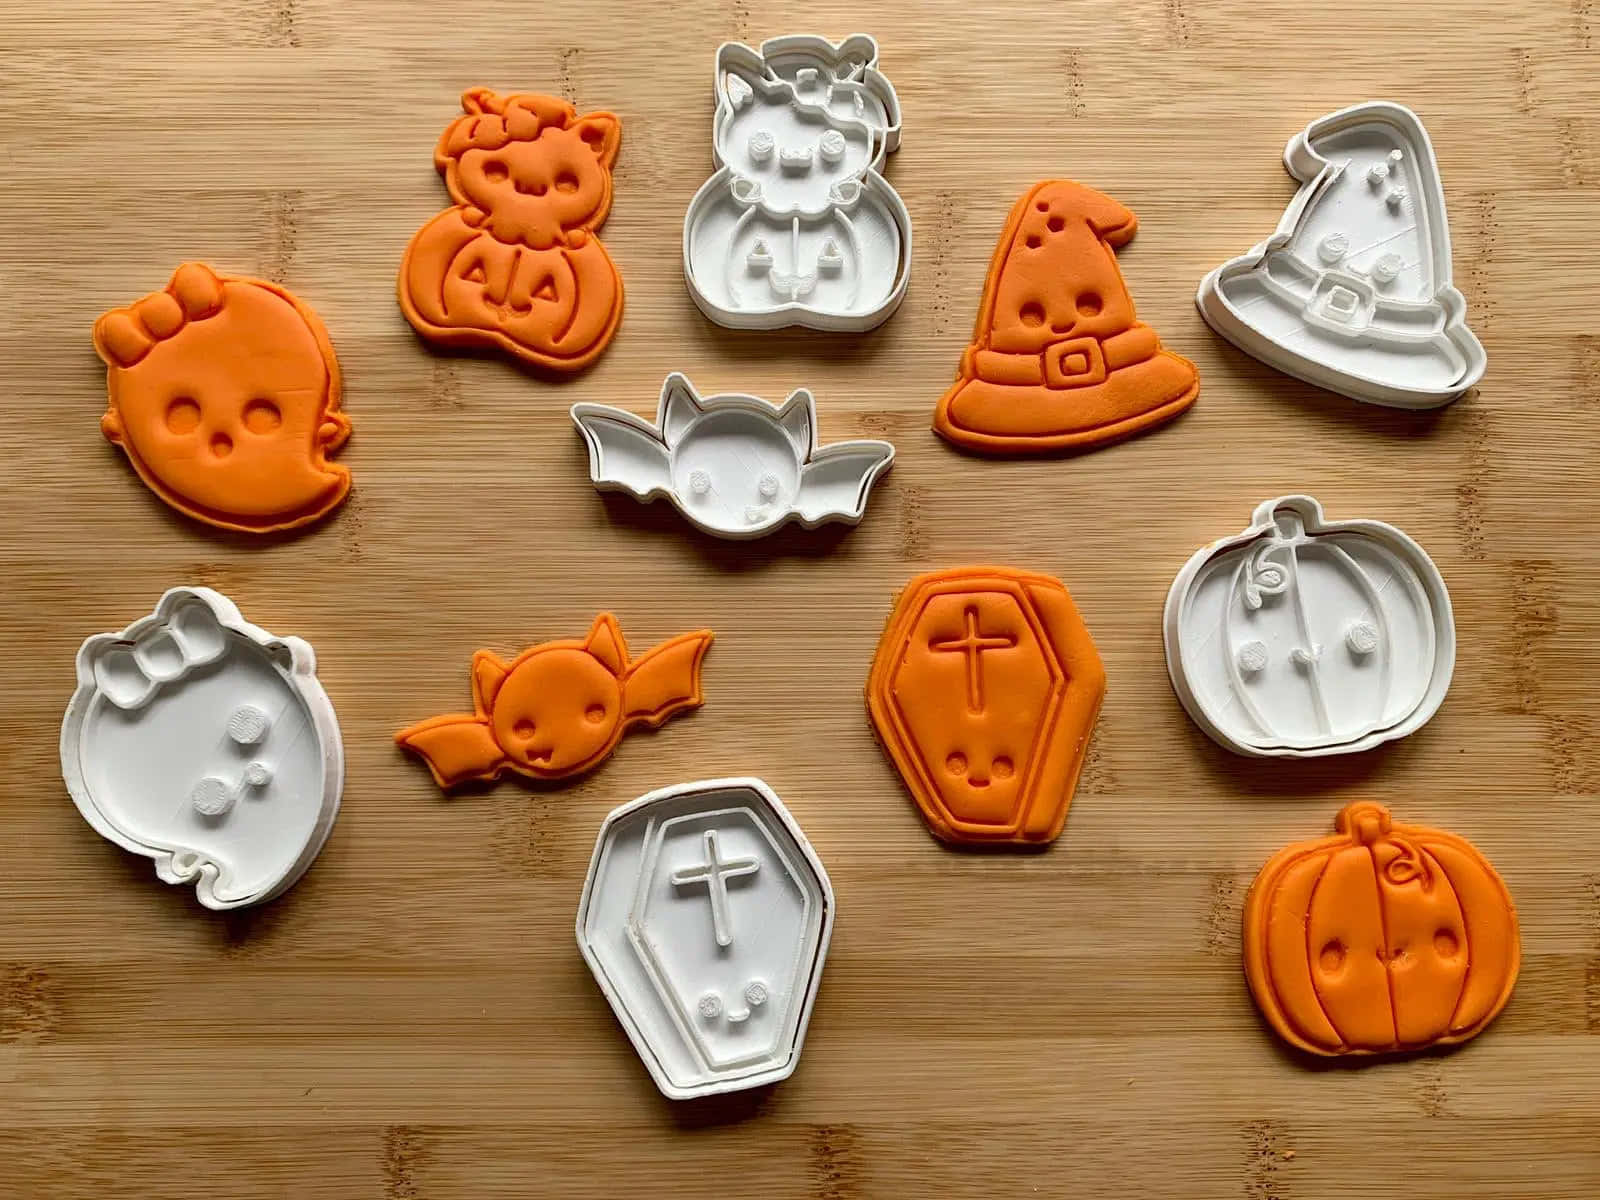 Time For Some Spooky Halloween Fun With Cookie Cutters Wallpaper